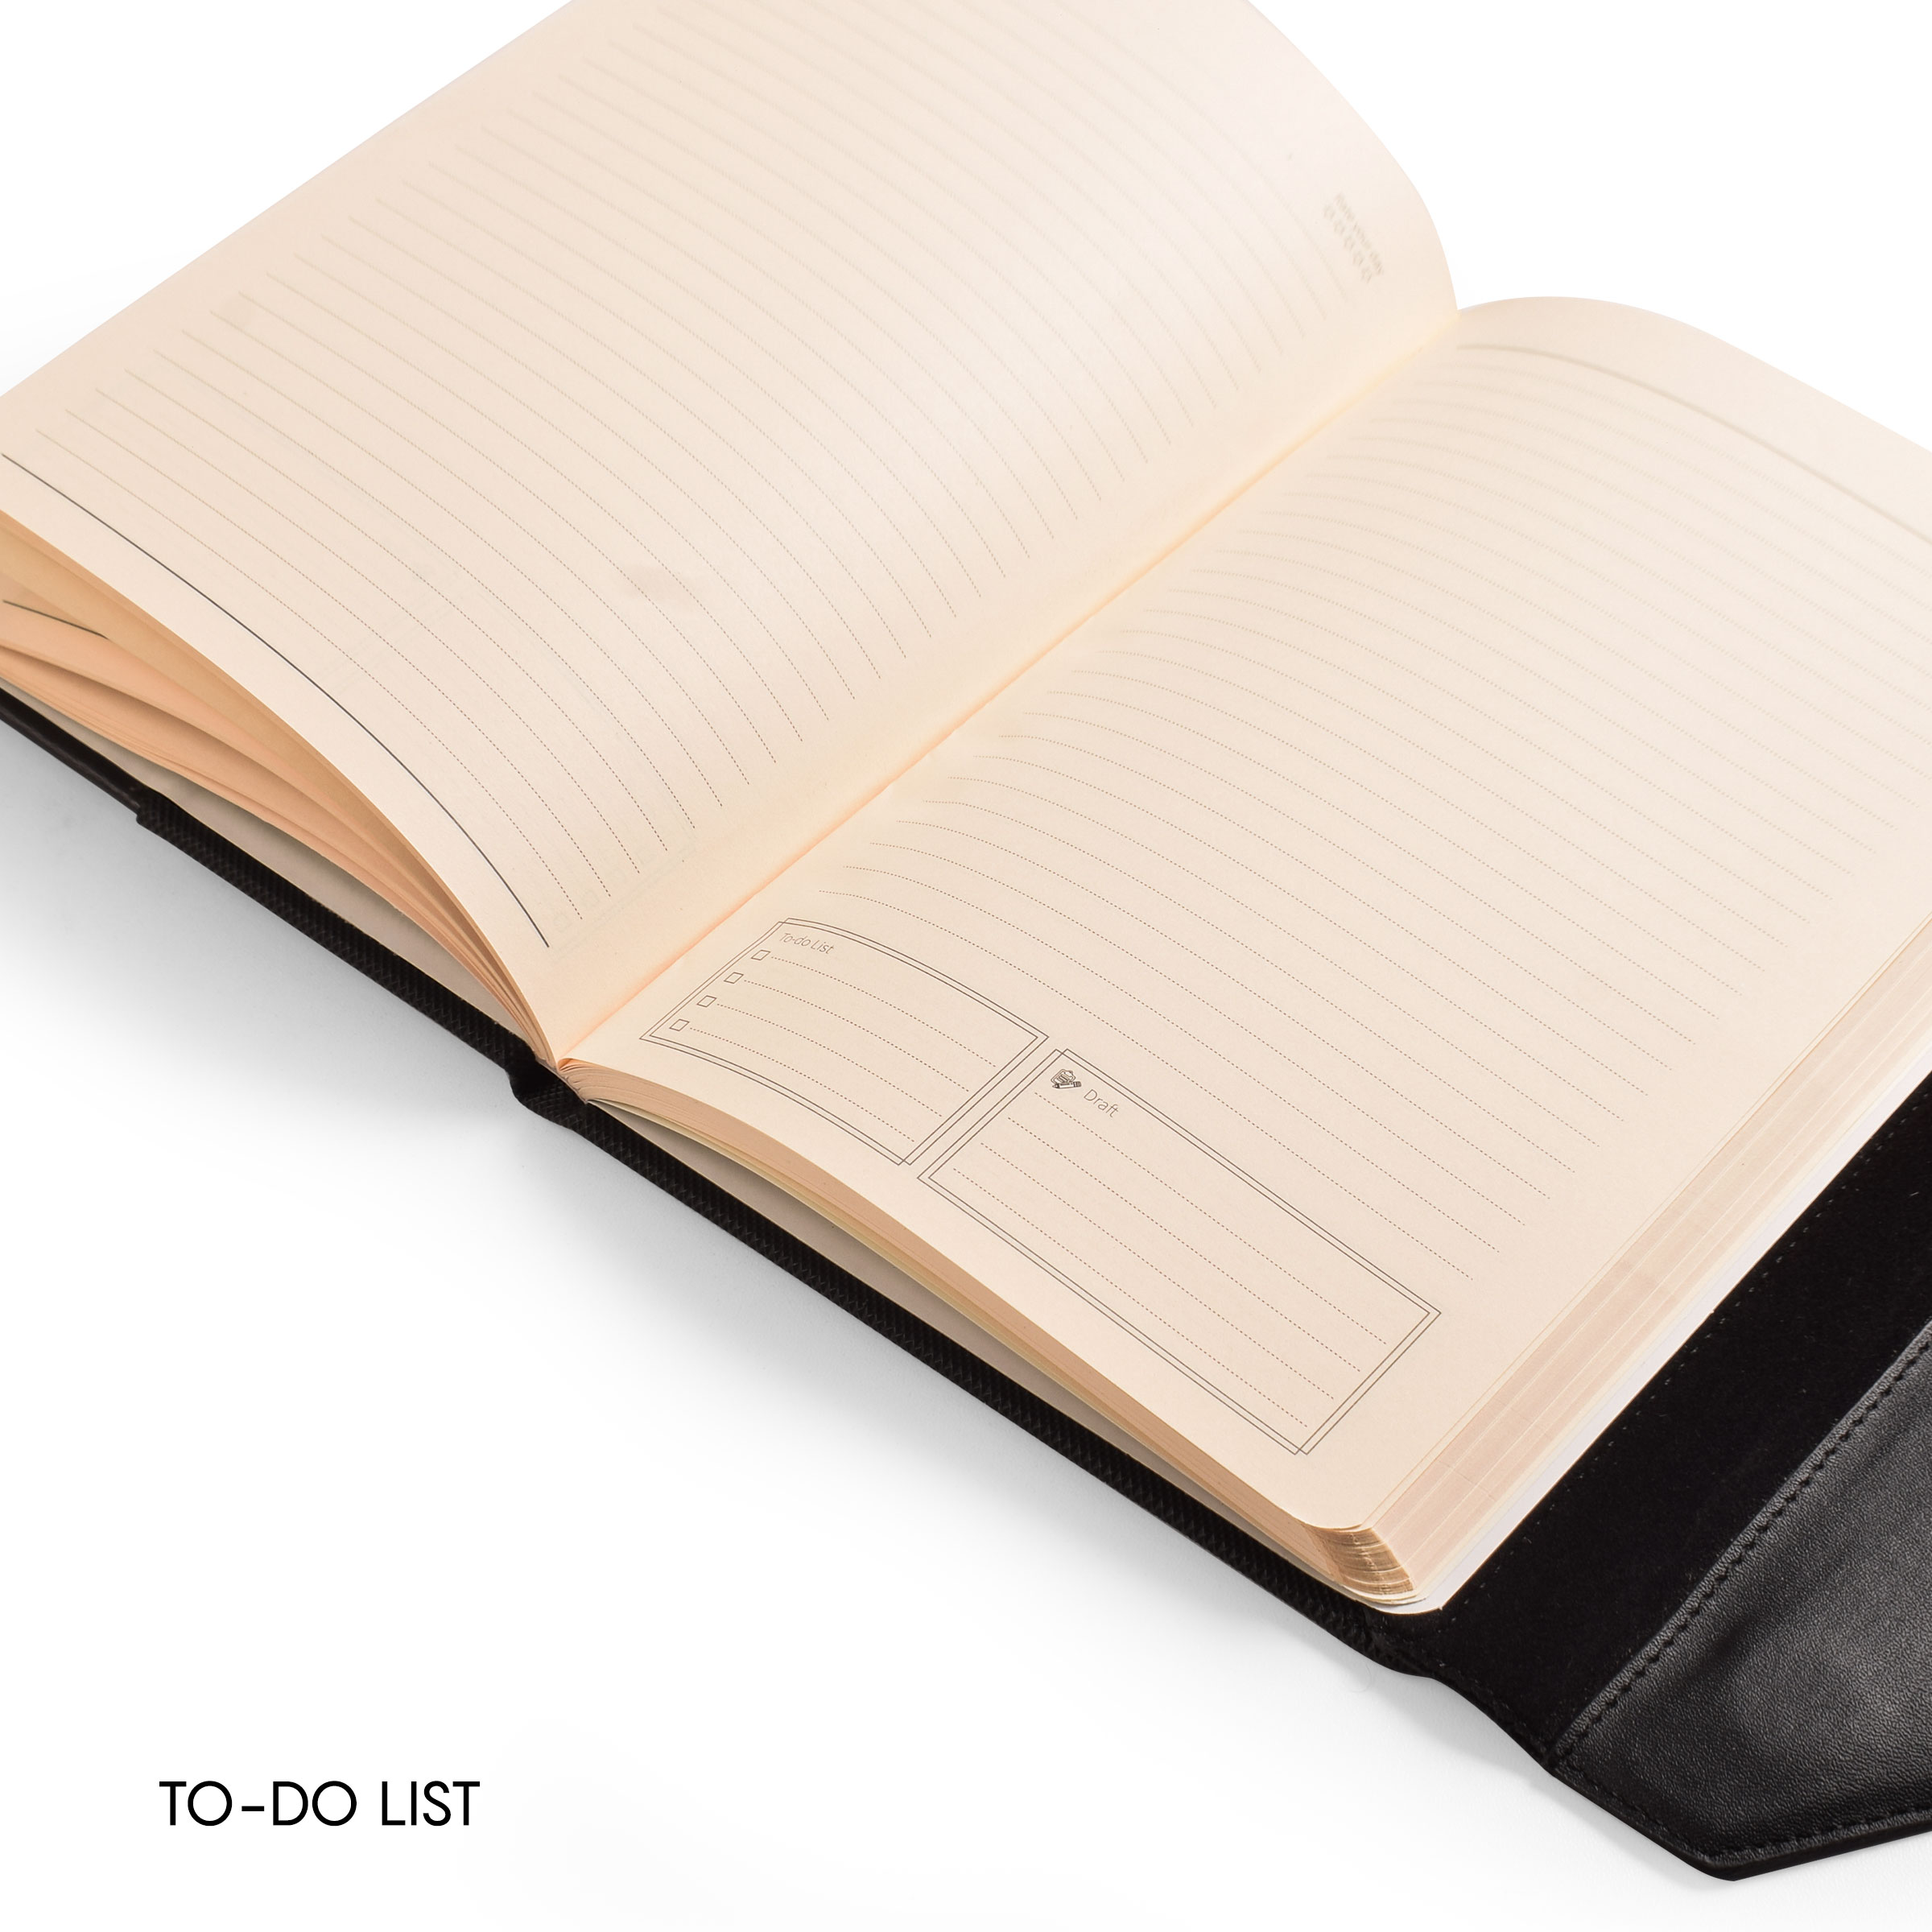 Atom Notebook Leather Cover - Black ANB18